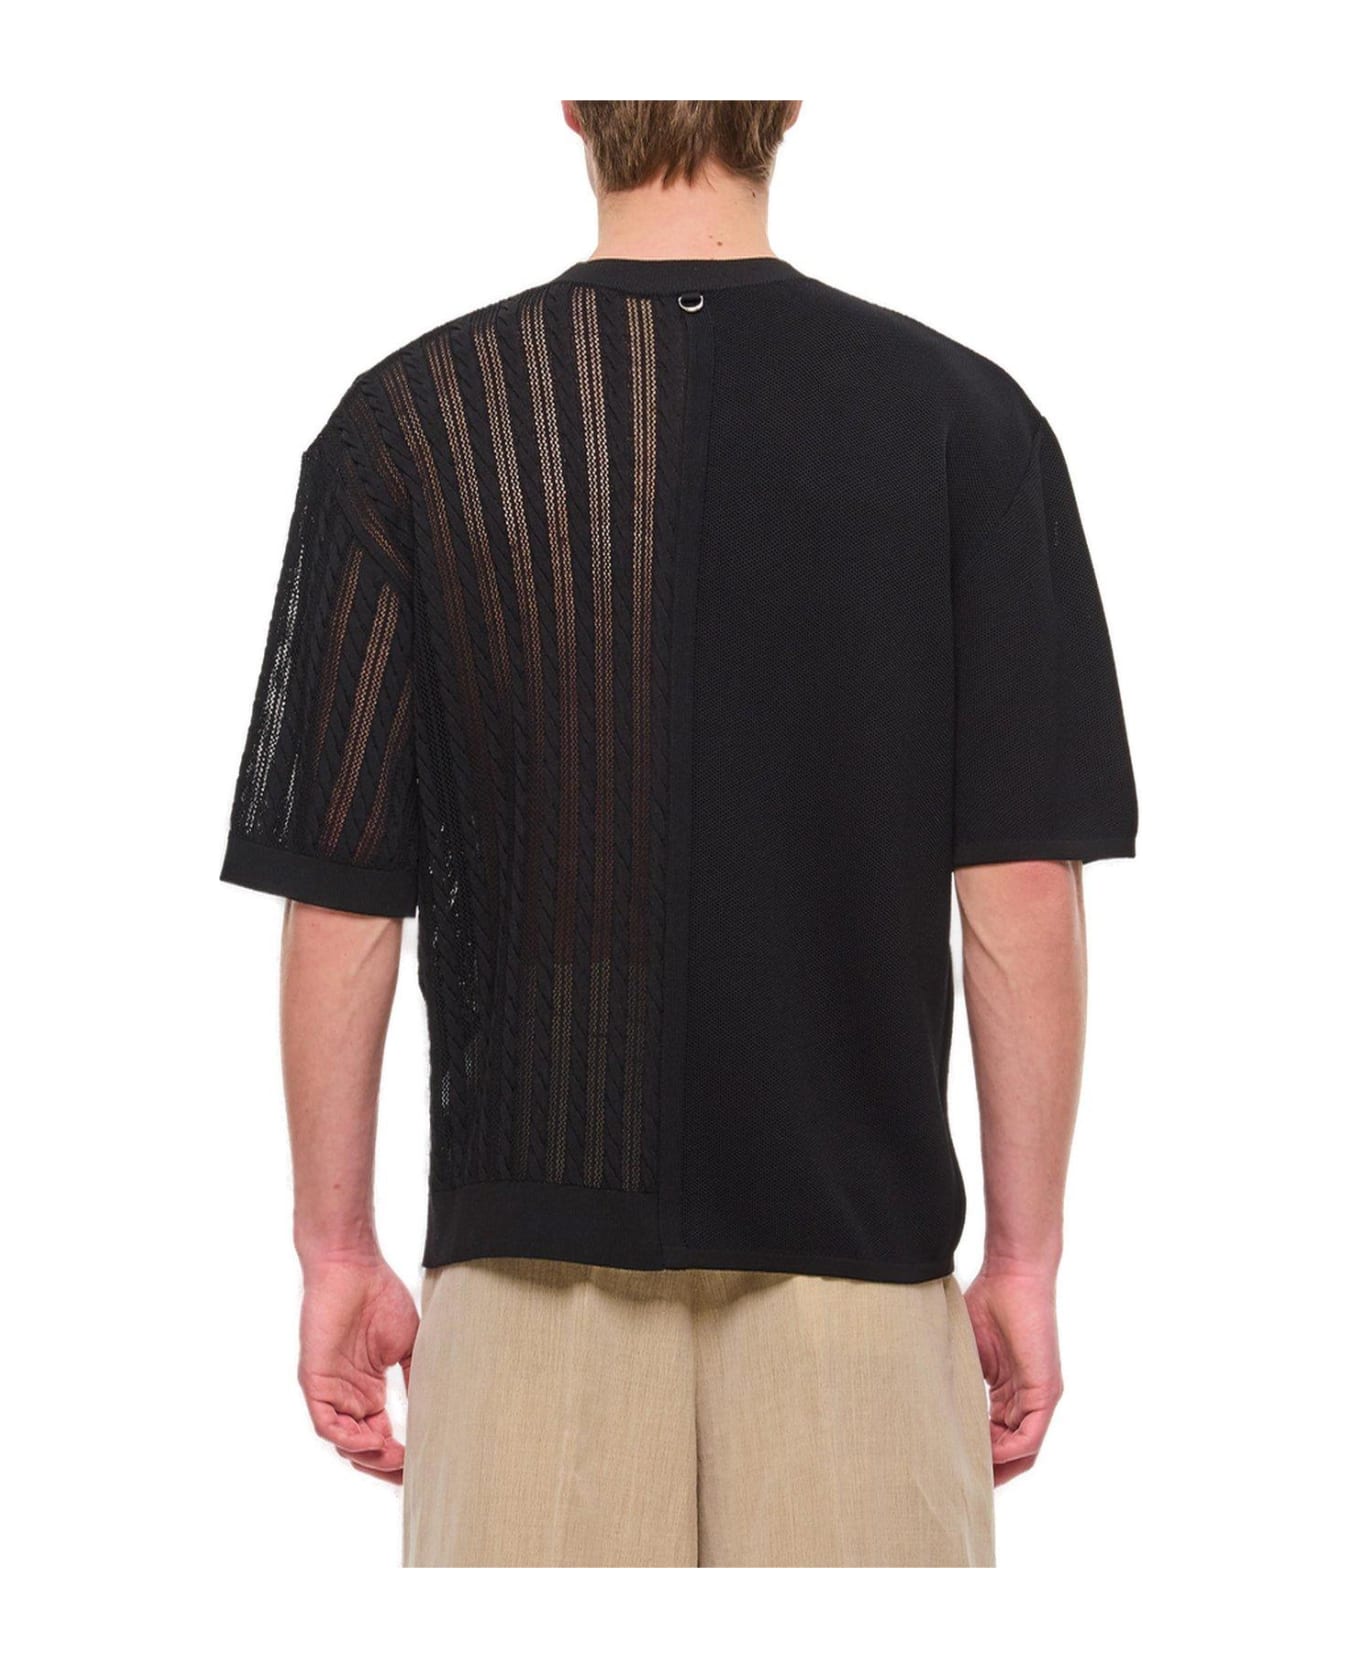 Jacquemus Contrast Knitted Top - Black